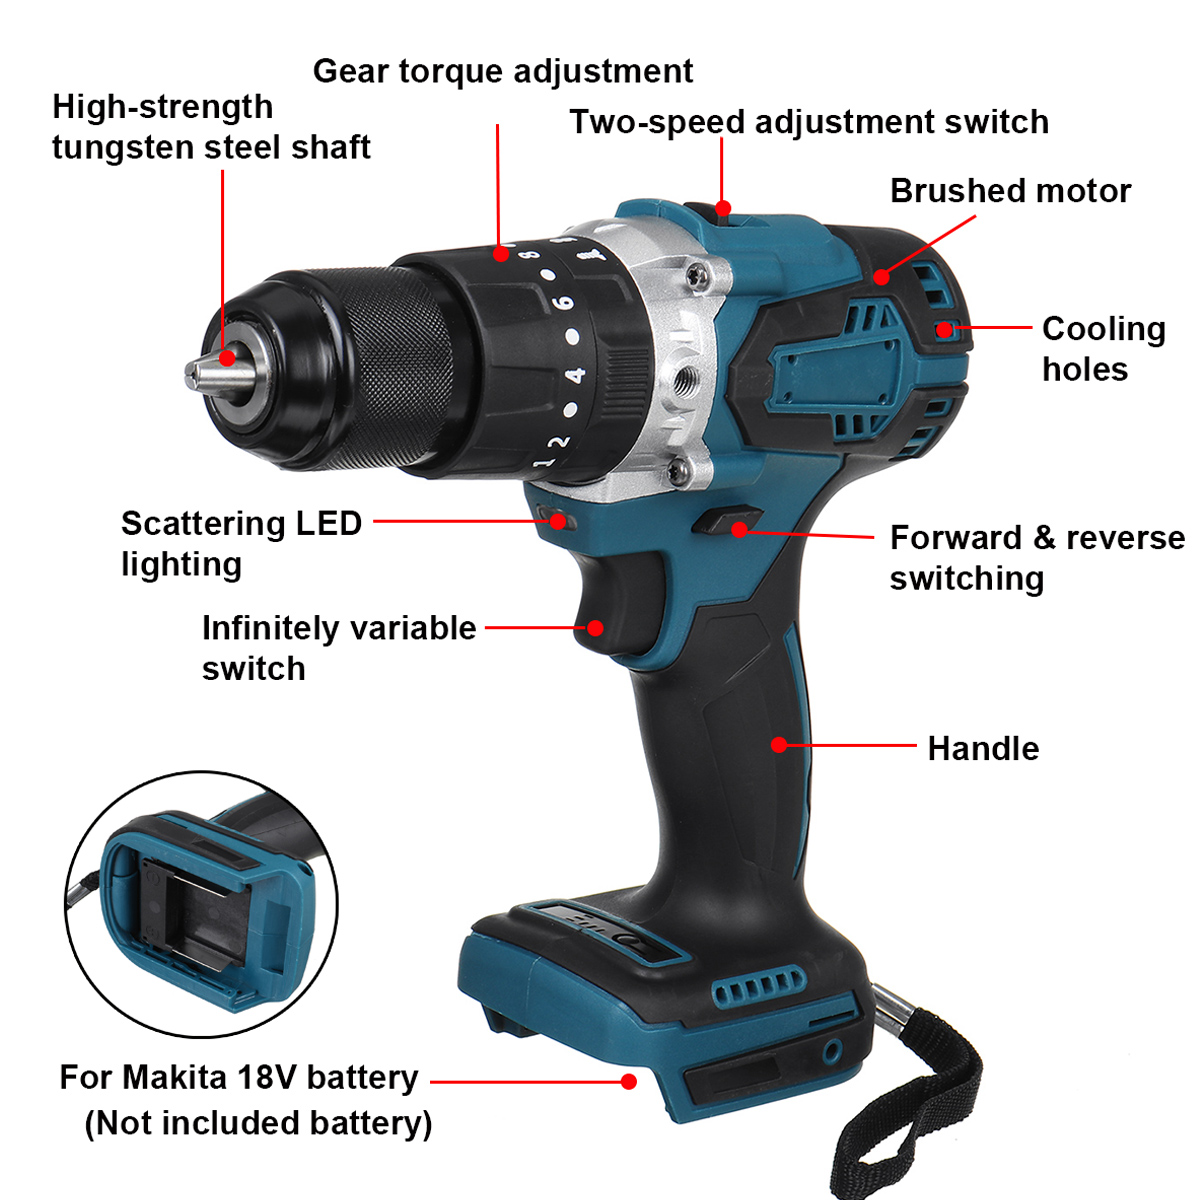 13mm-Chuck-Brushless-Cordless-Electric-Impact-Drill-Hammer-Screwdriver-For-Makita-18V-Battery-1855970-5